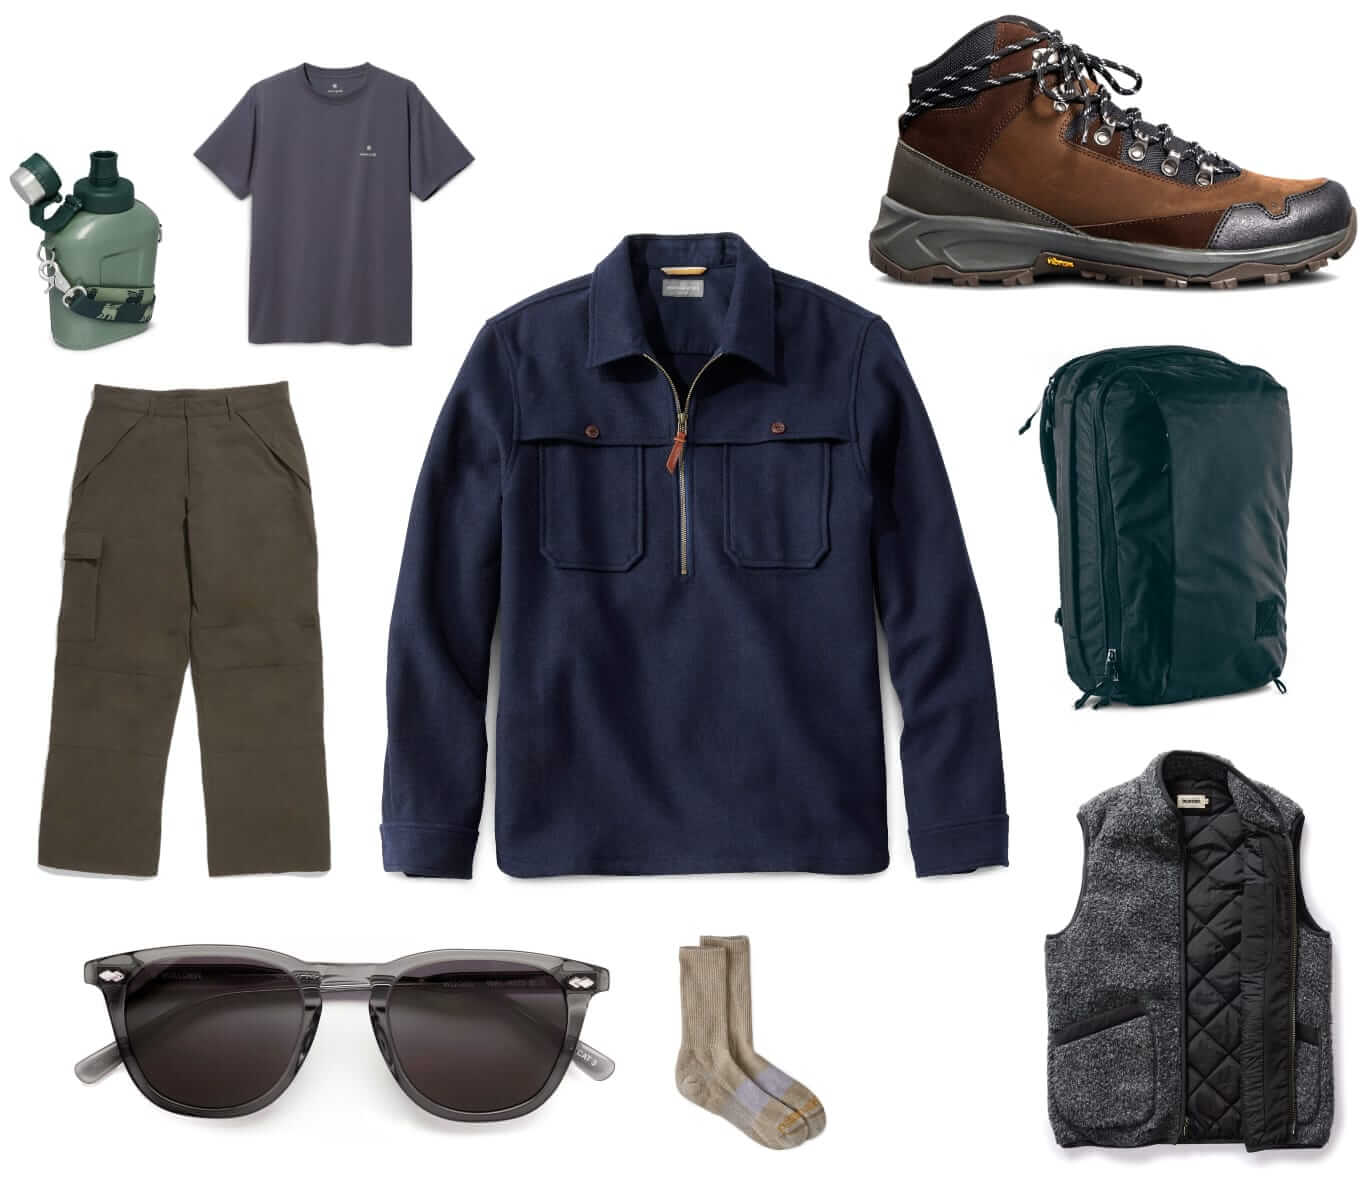 Fall Hiking Outfit from Stowe Vermont #hikingoutfit #stowe